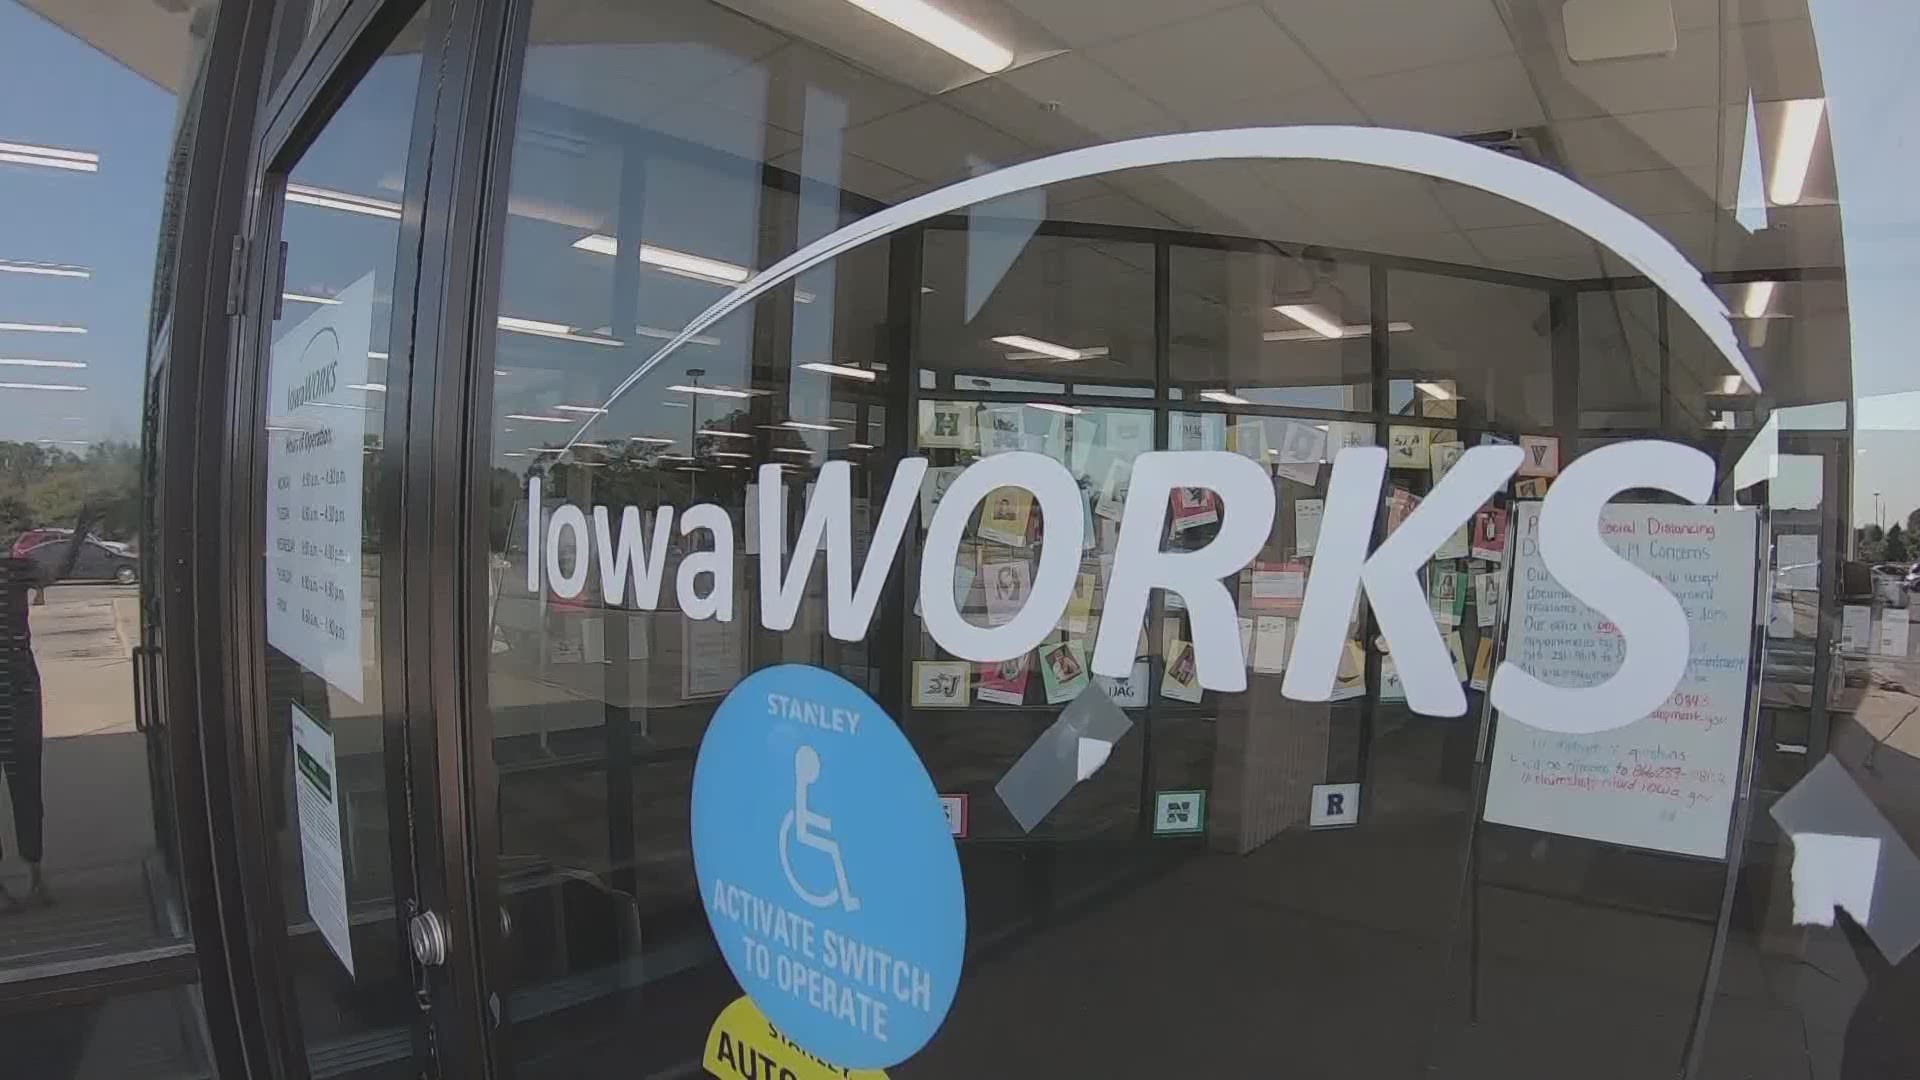 Unemployed Iowans say they haven't received unemployment benefits